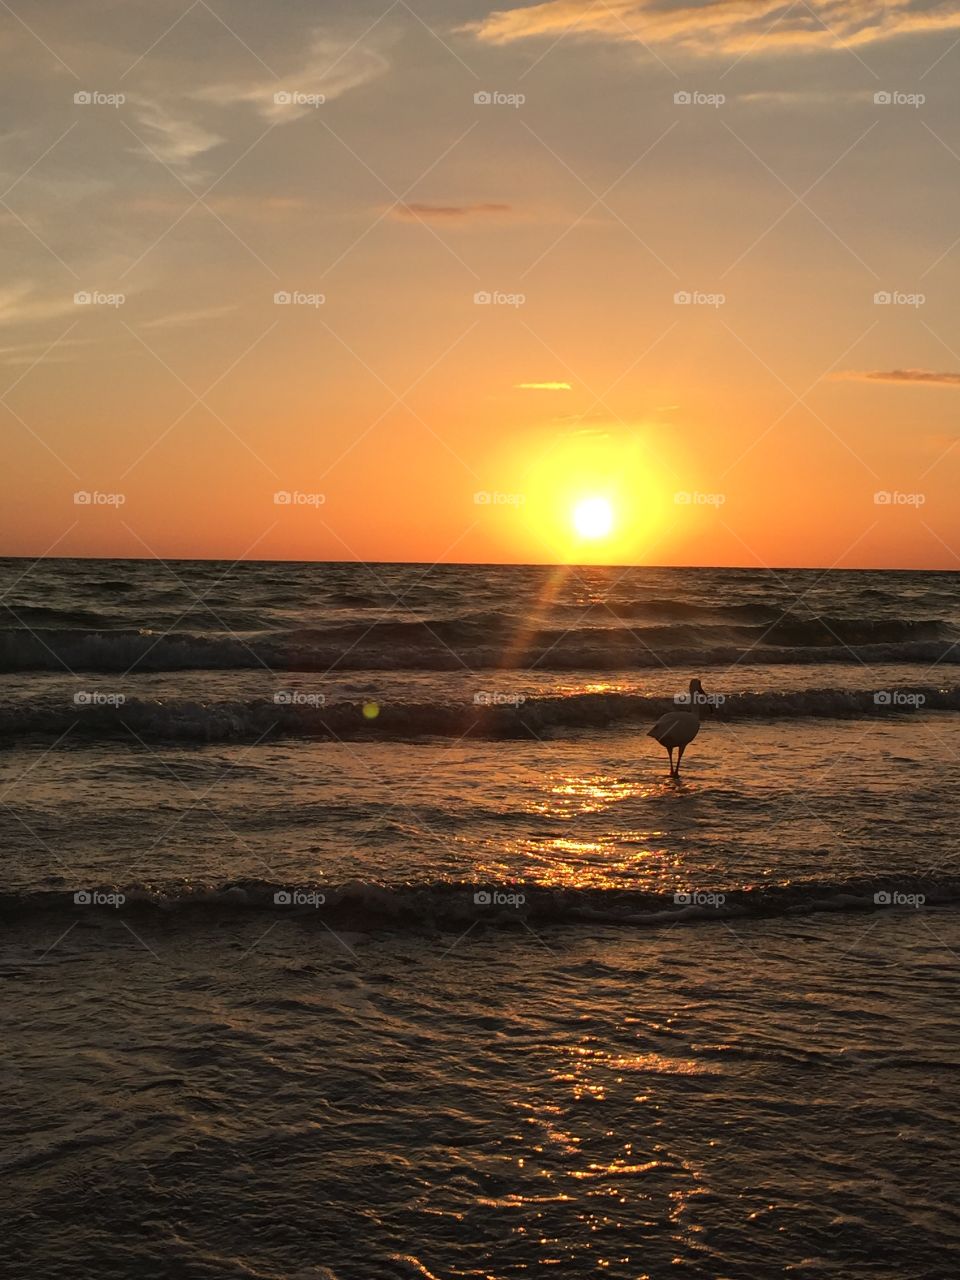 Sarasota Florida sunset with a bird in the picture 